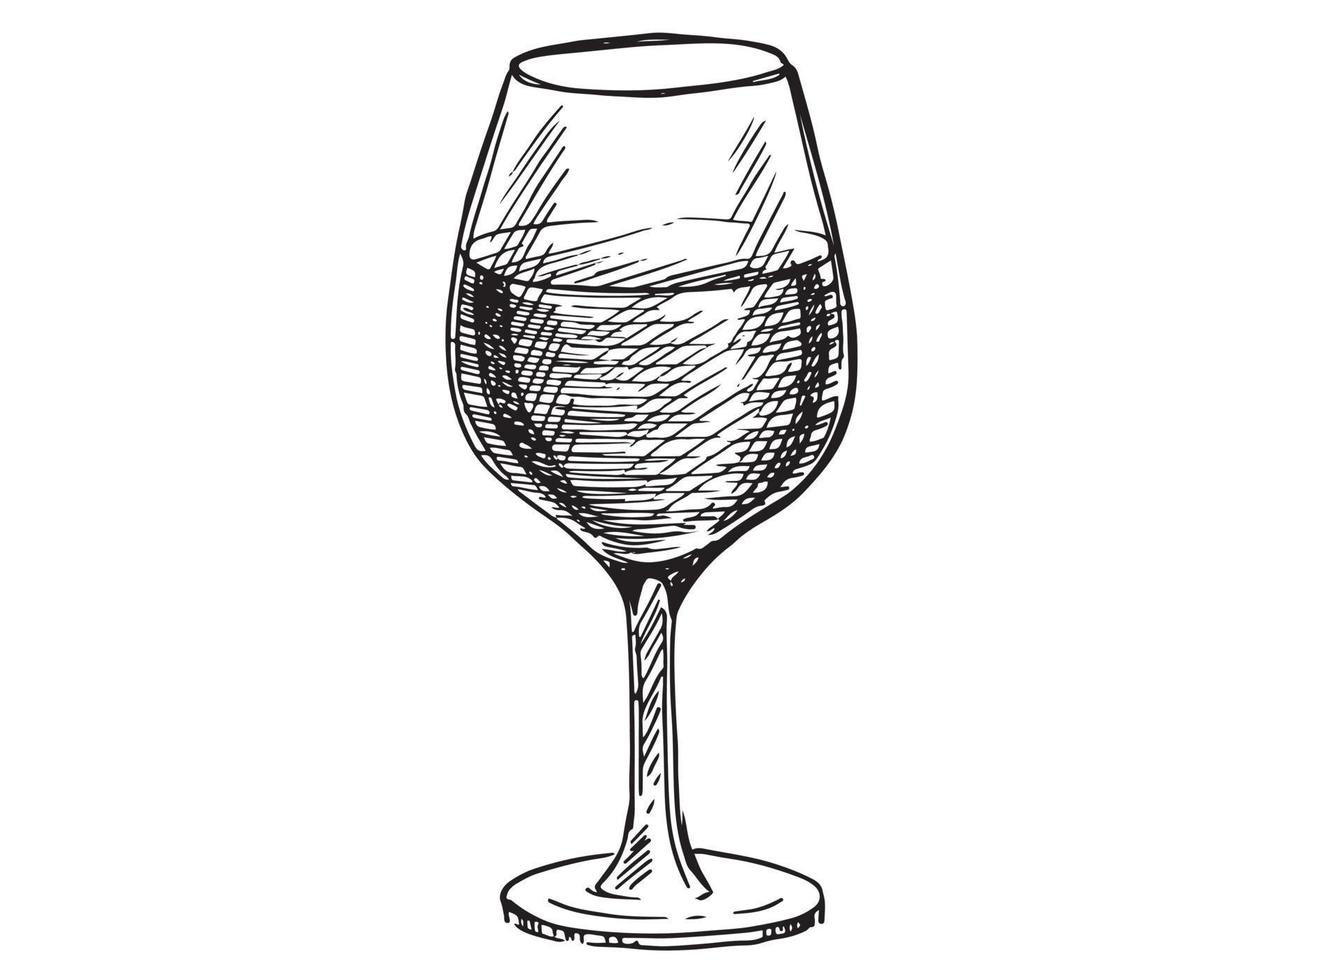 Drawing a glass of red wine with colored pencils by korkmazart on DeviantArt